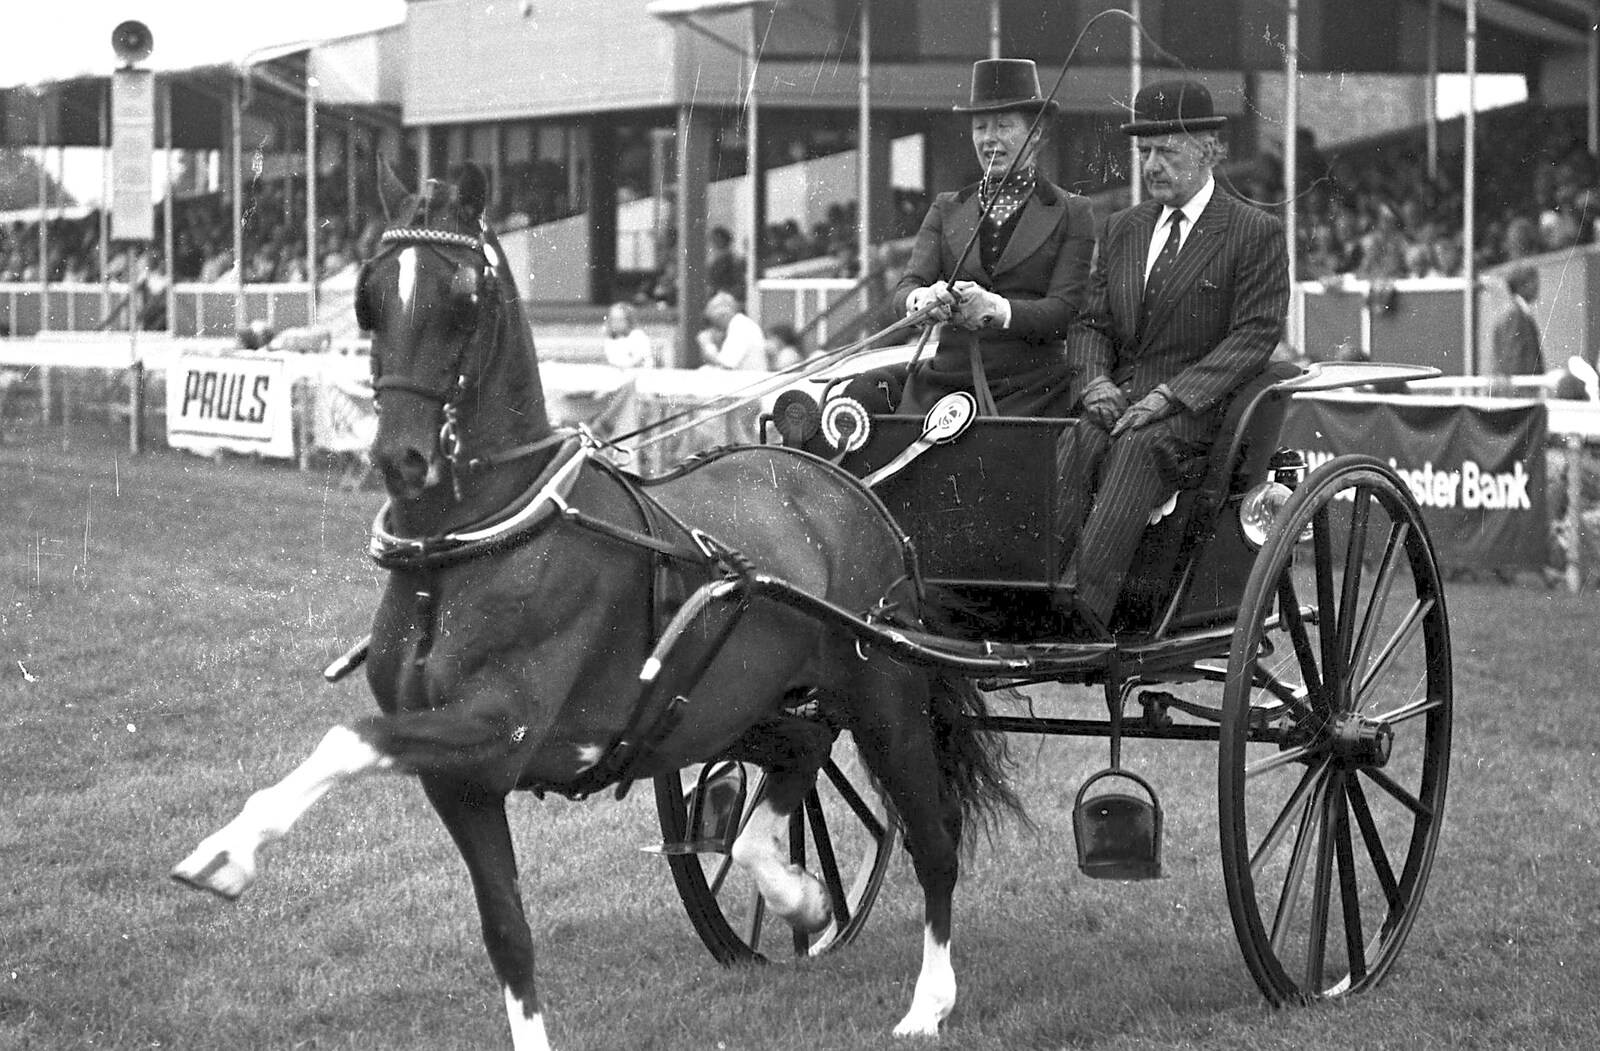 The Royal Norfolk Show, Costessey, Norwich - June 20th 1994: A horse prances around the show ring